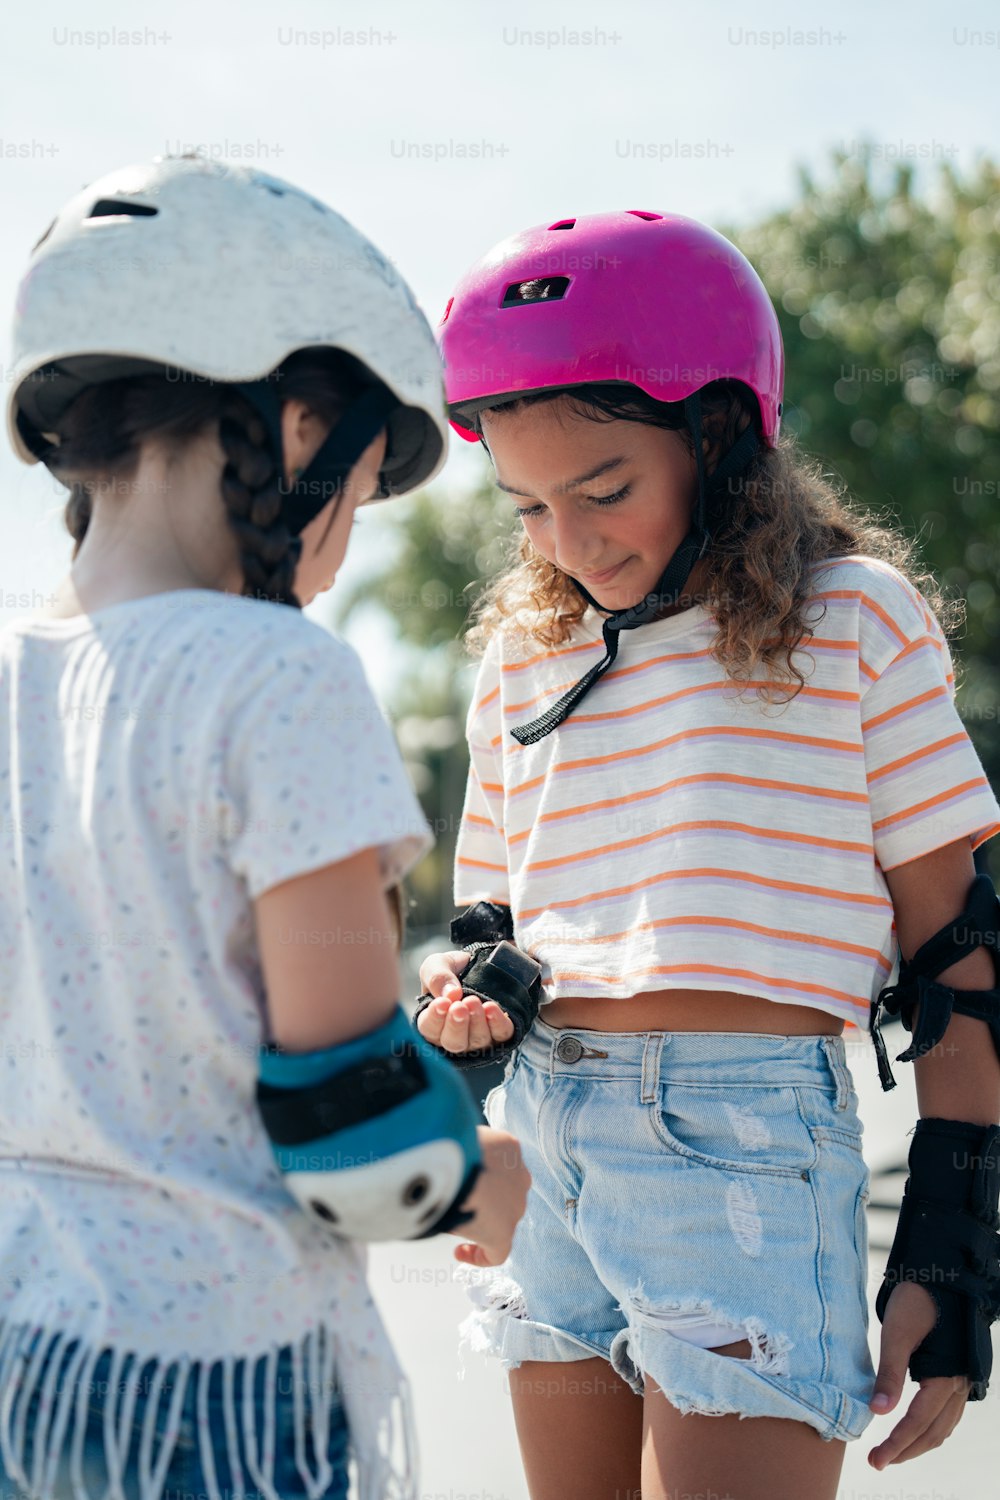 two young girls wearing helmets and knee pads